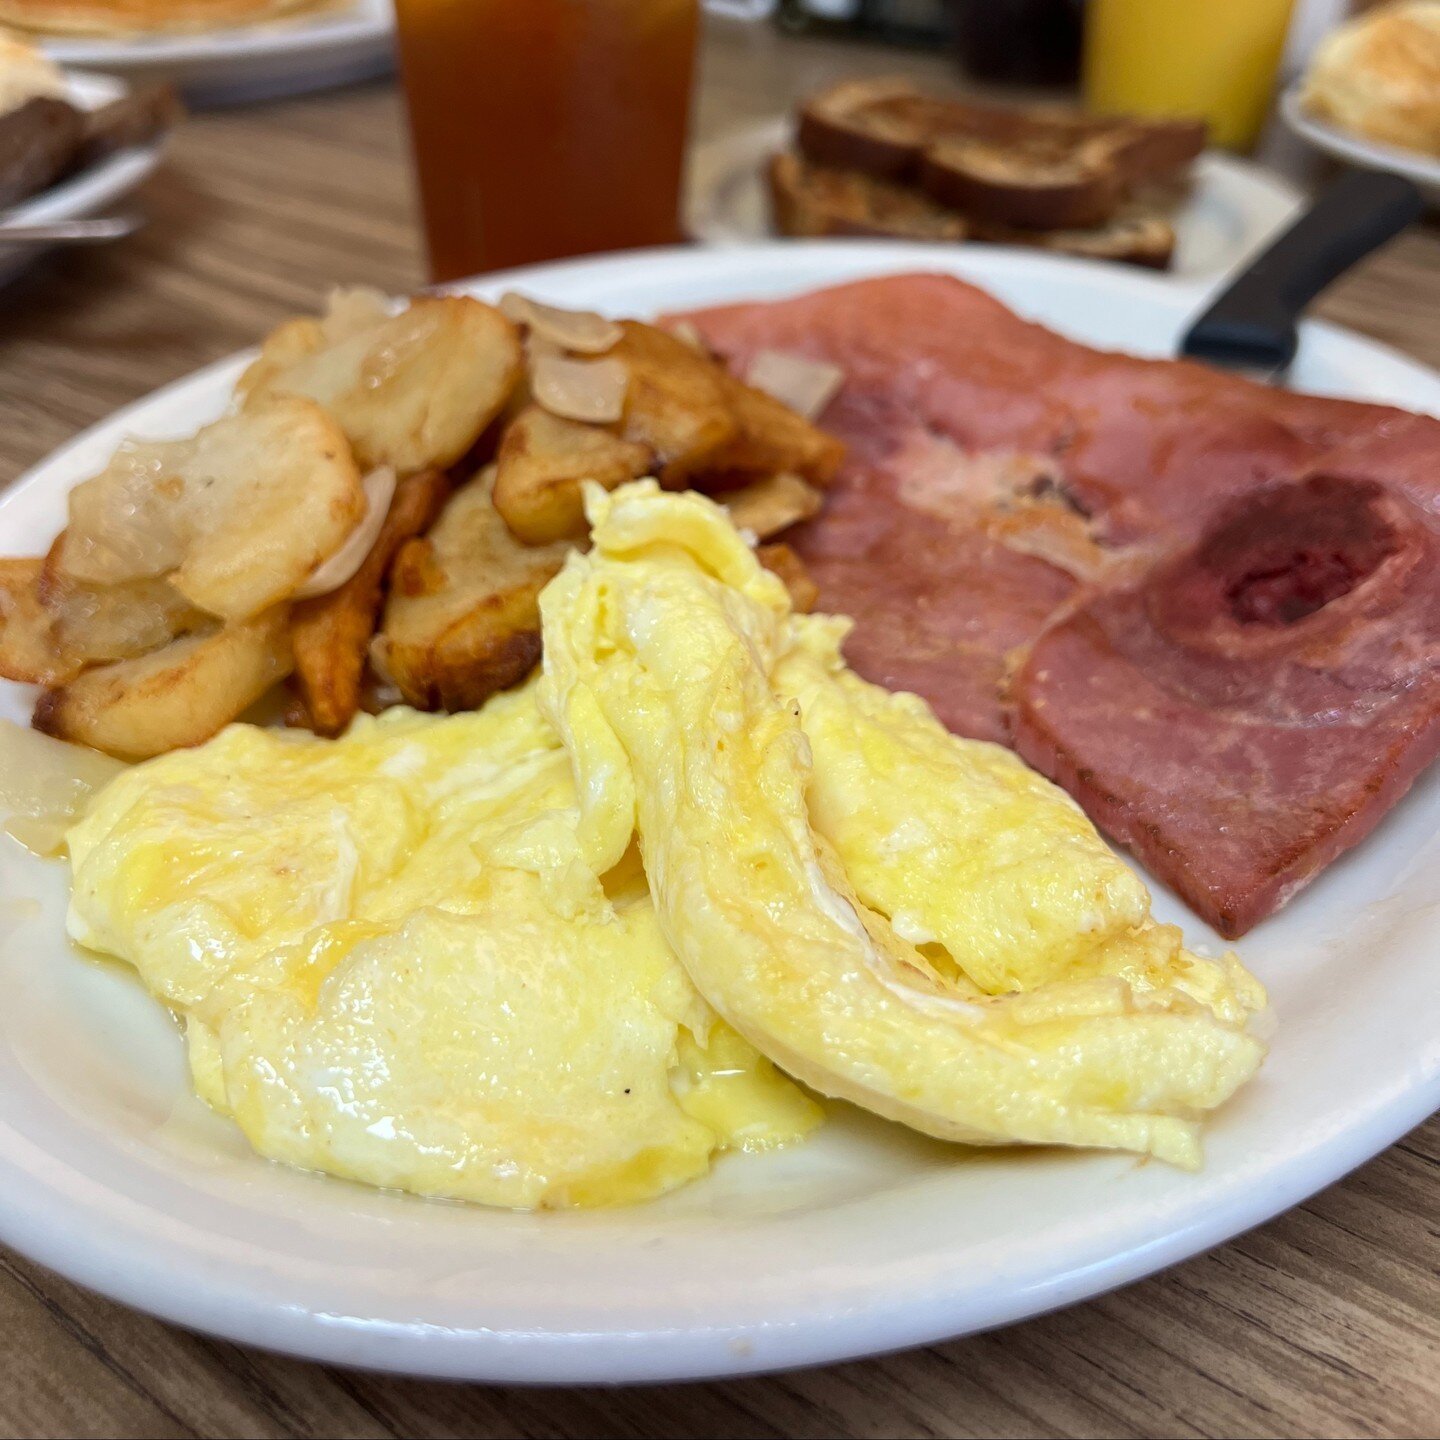 Everyone's cleaning up after dinner and I'm over here dreaming up what I want for breakfast already!
#bigbreakfast #nashvillebreakfast #countryham #scrambledeggs #omelette #grits #biscuitandgravy #gravybiscuit #eggsovereasy #sunnysideupeggs #bacon #b